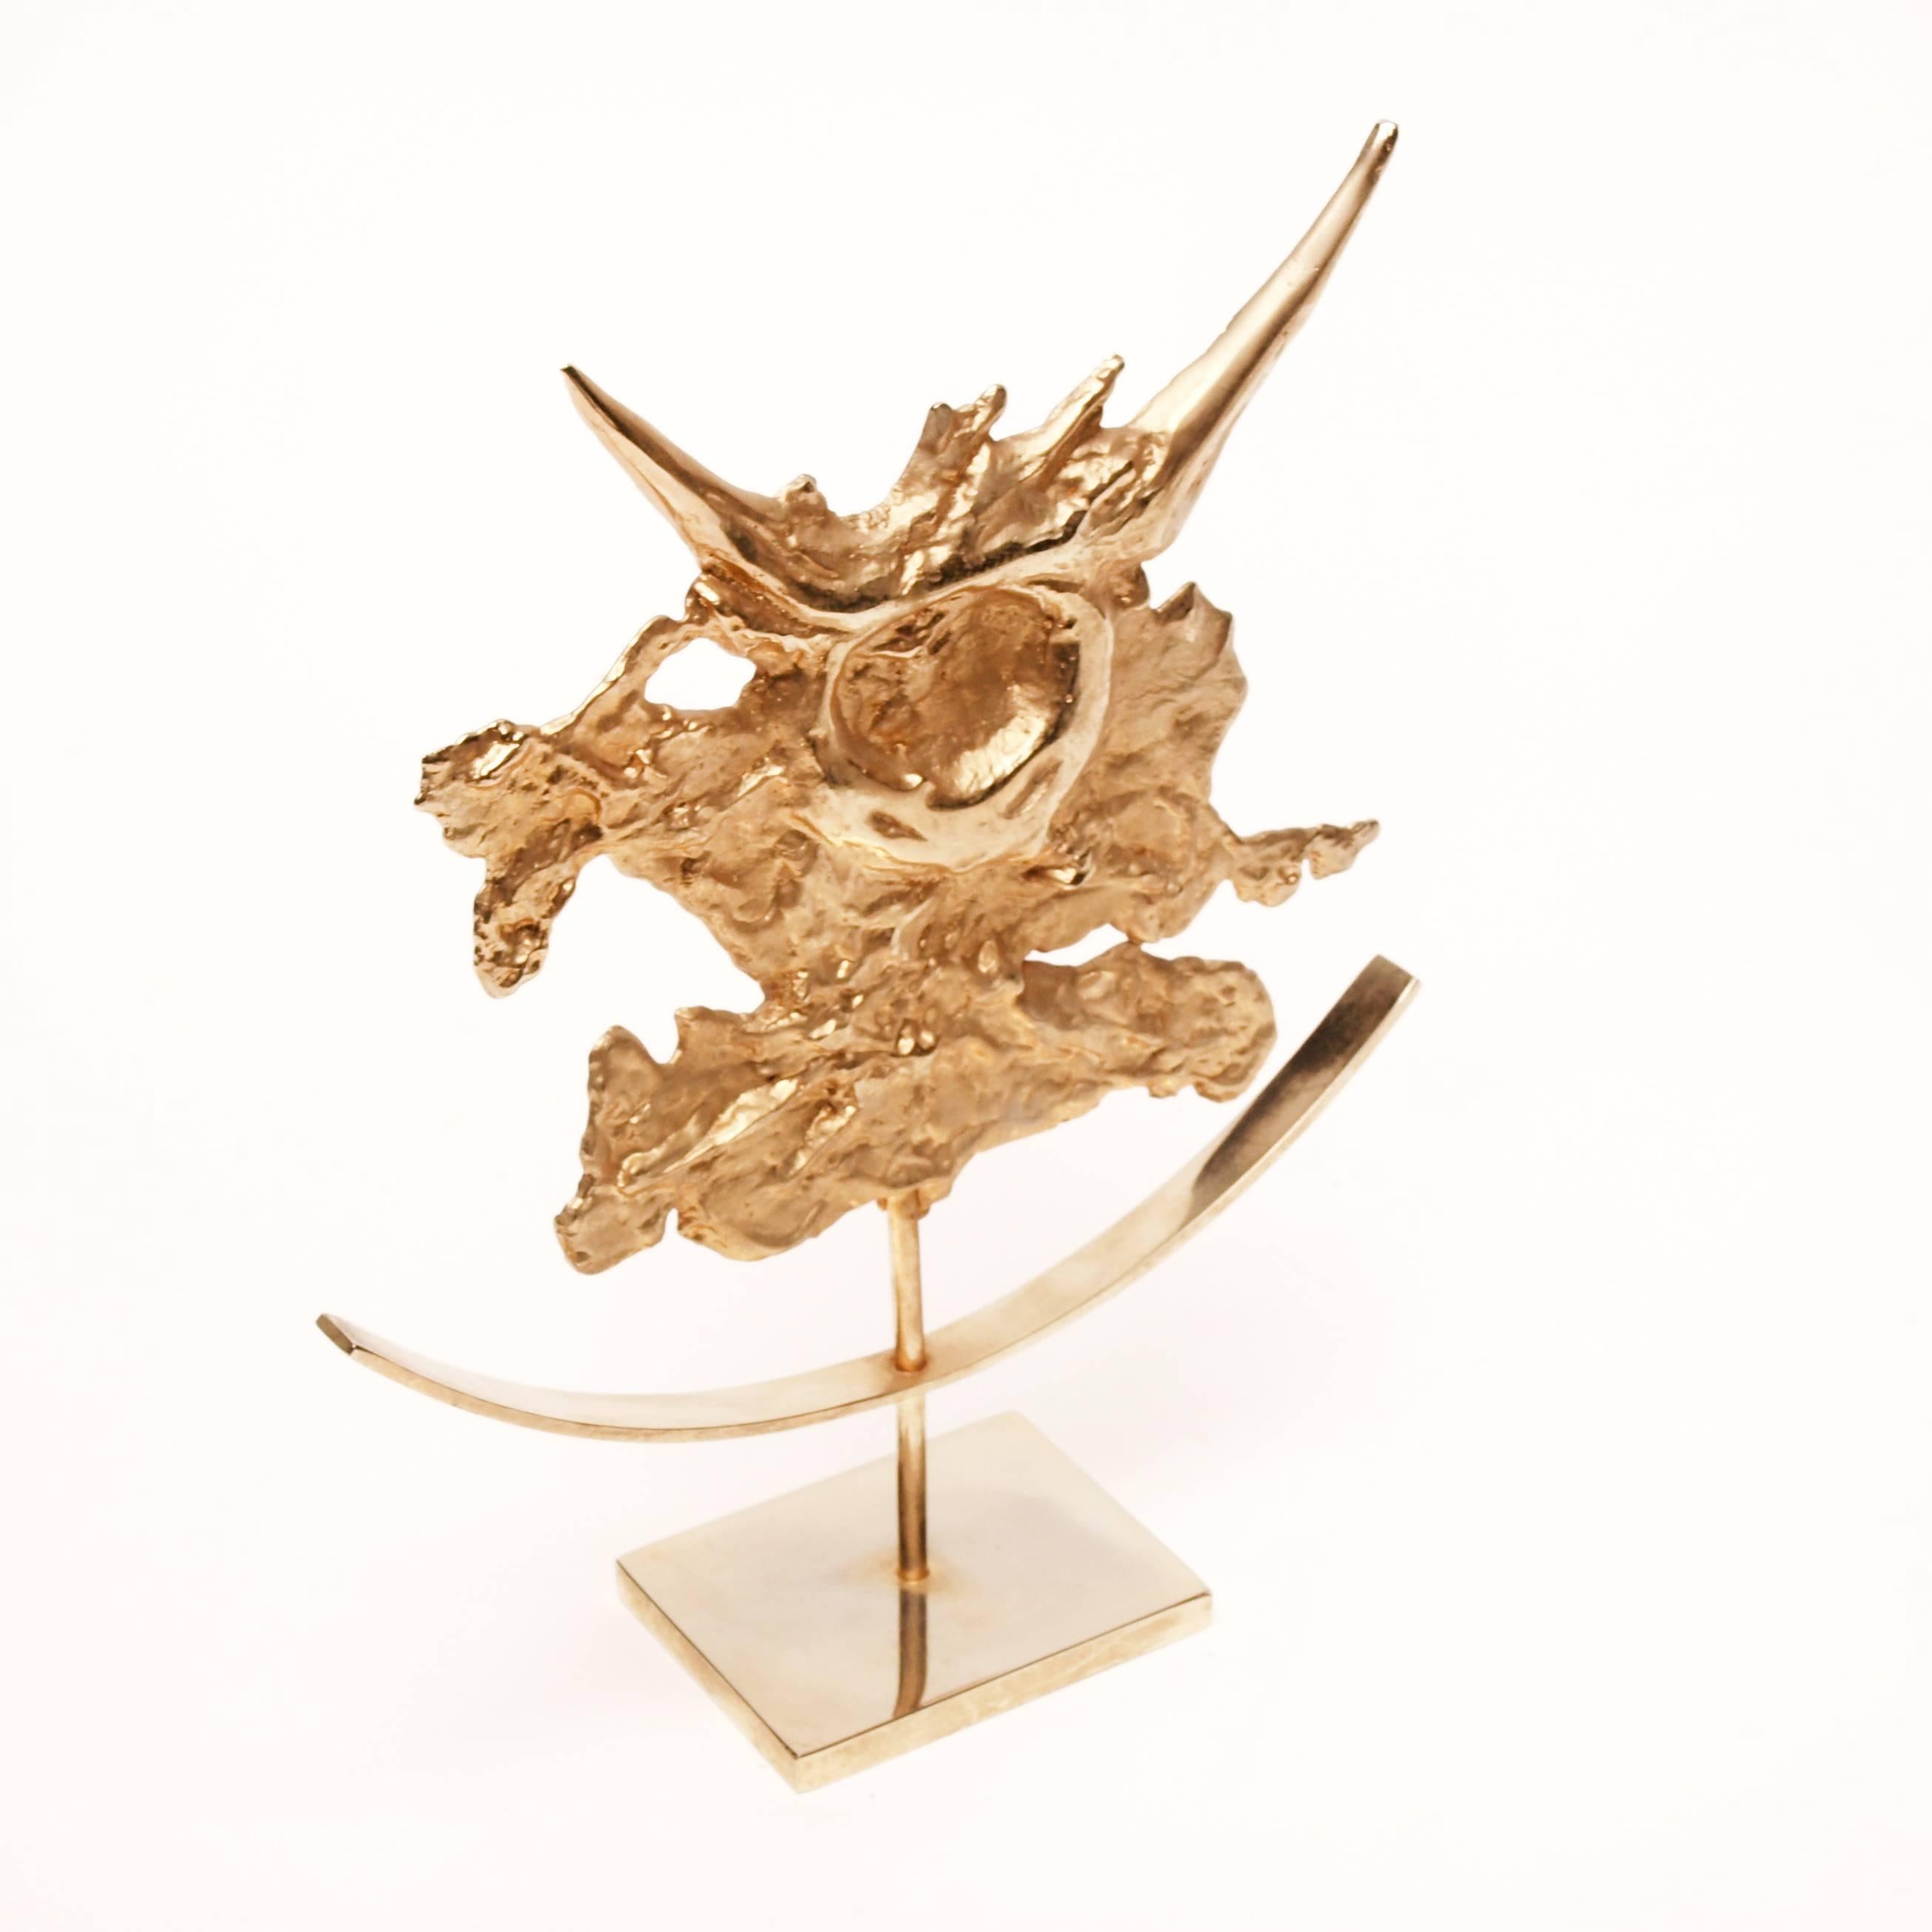 A gilded Taurus zodiac sculpture by Philippe Cheverny. The French designer is known for his ornamental pieces, sculptural lamps and furniture designed and manufactured throughout the 1950s-1970s. His works have since become sought after for their